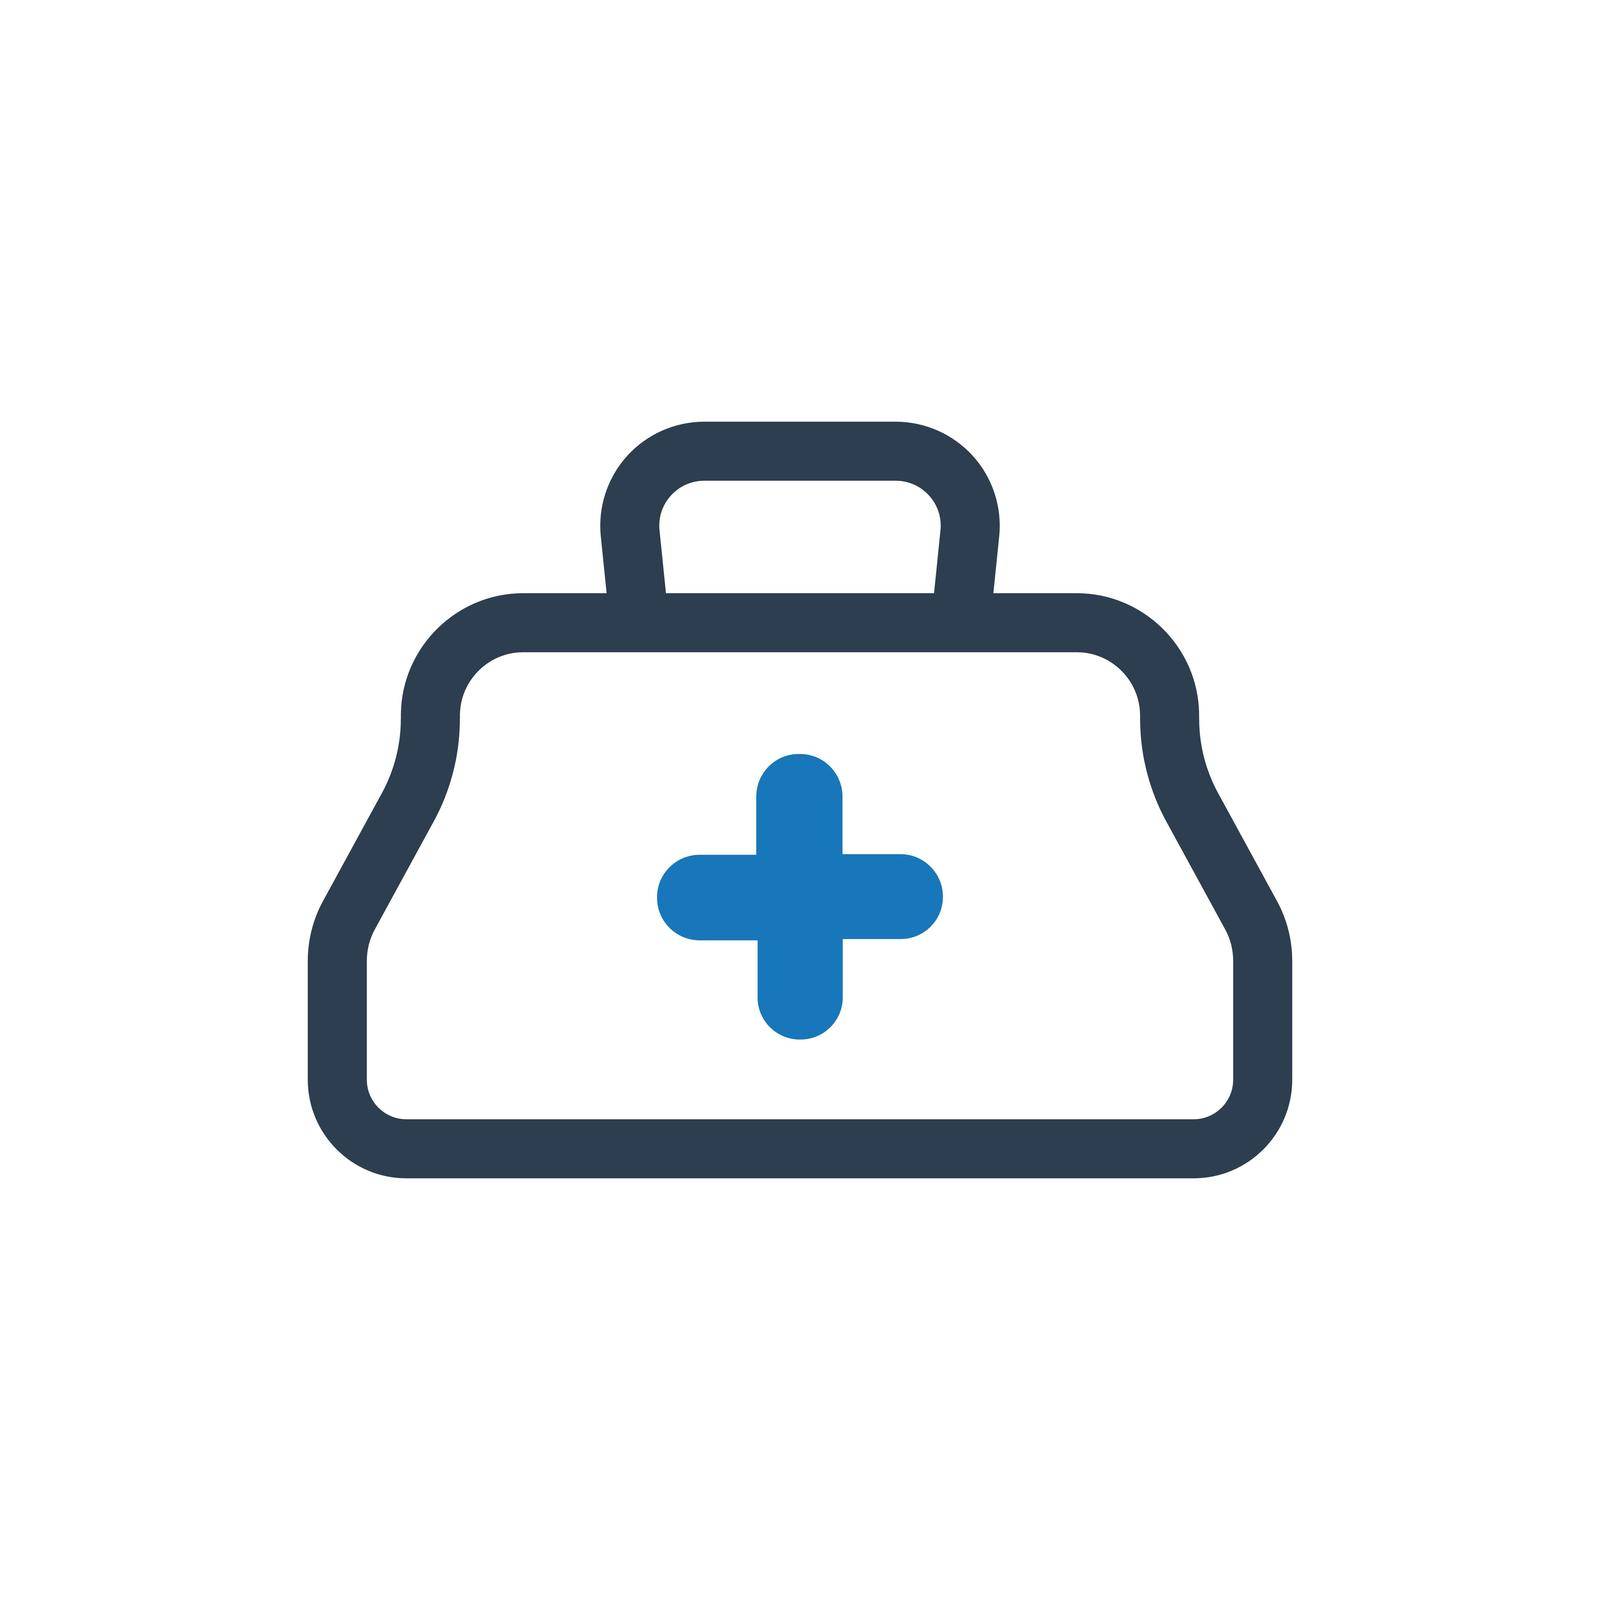 Doctor Bag icon. Vector EPS file.